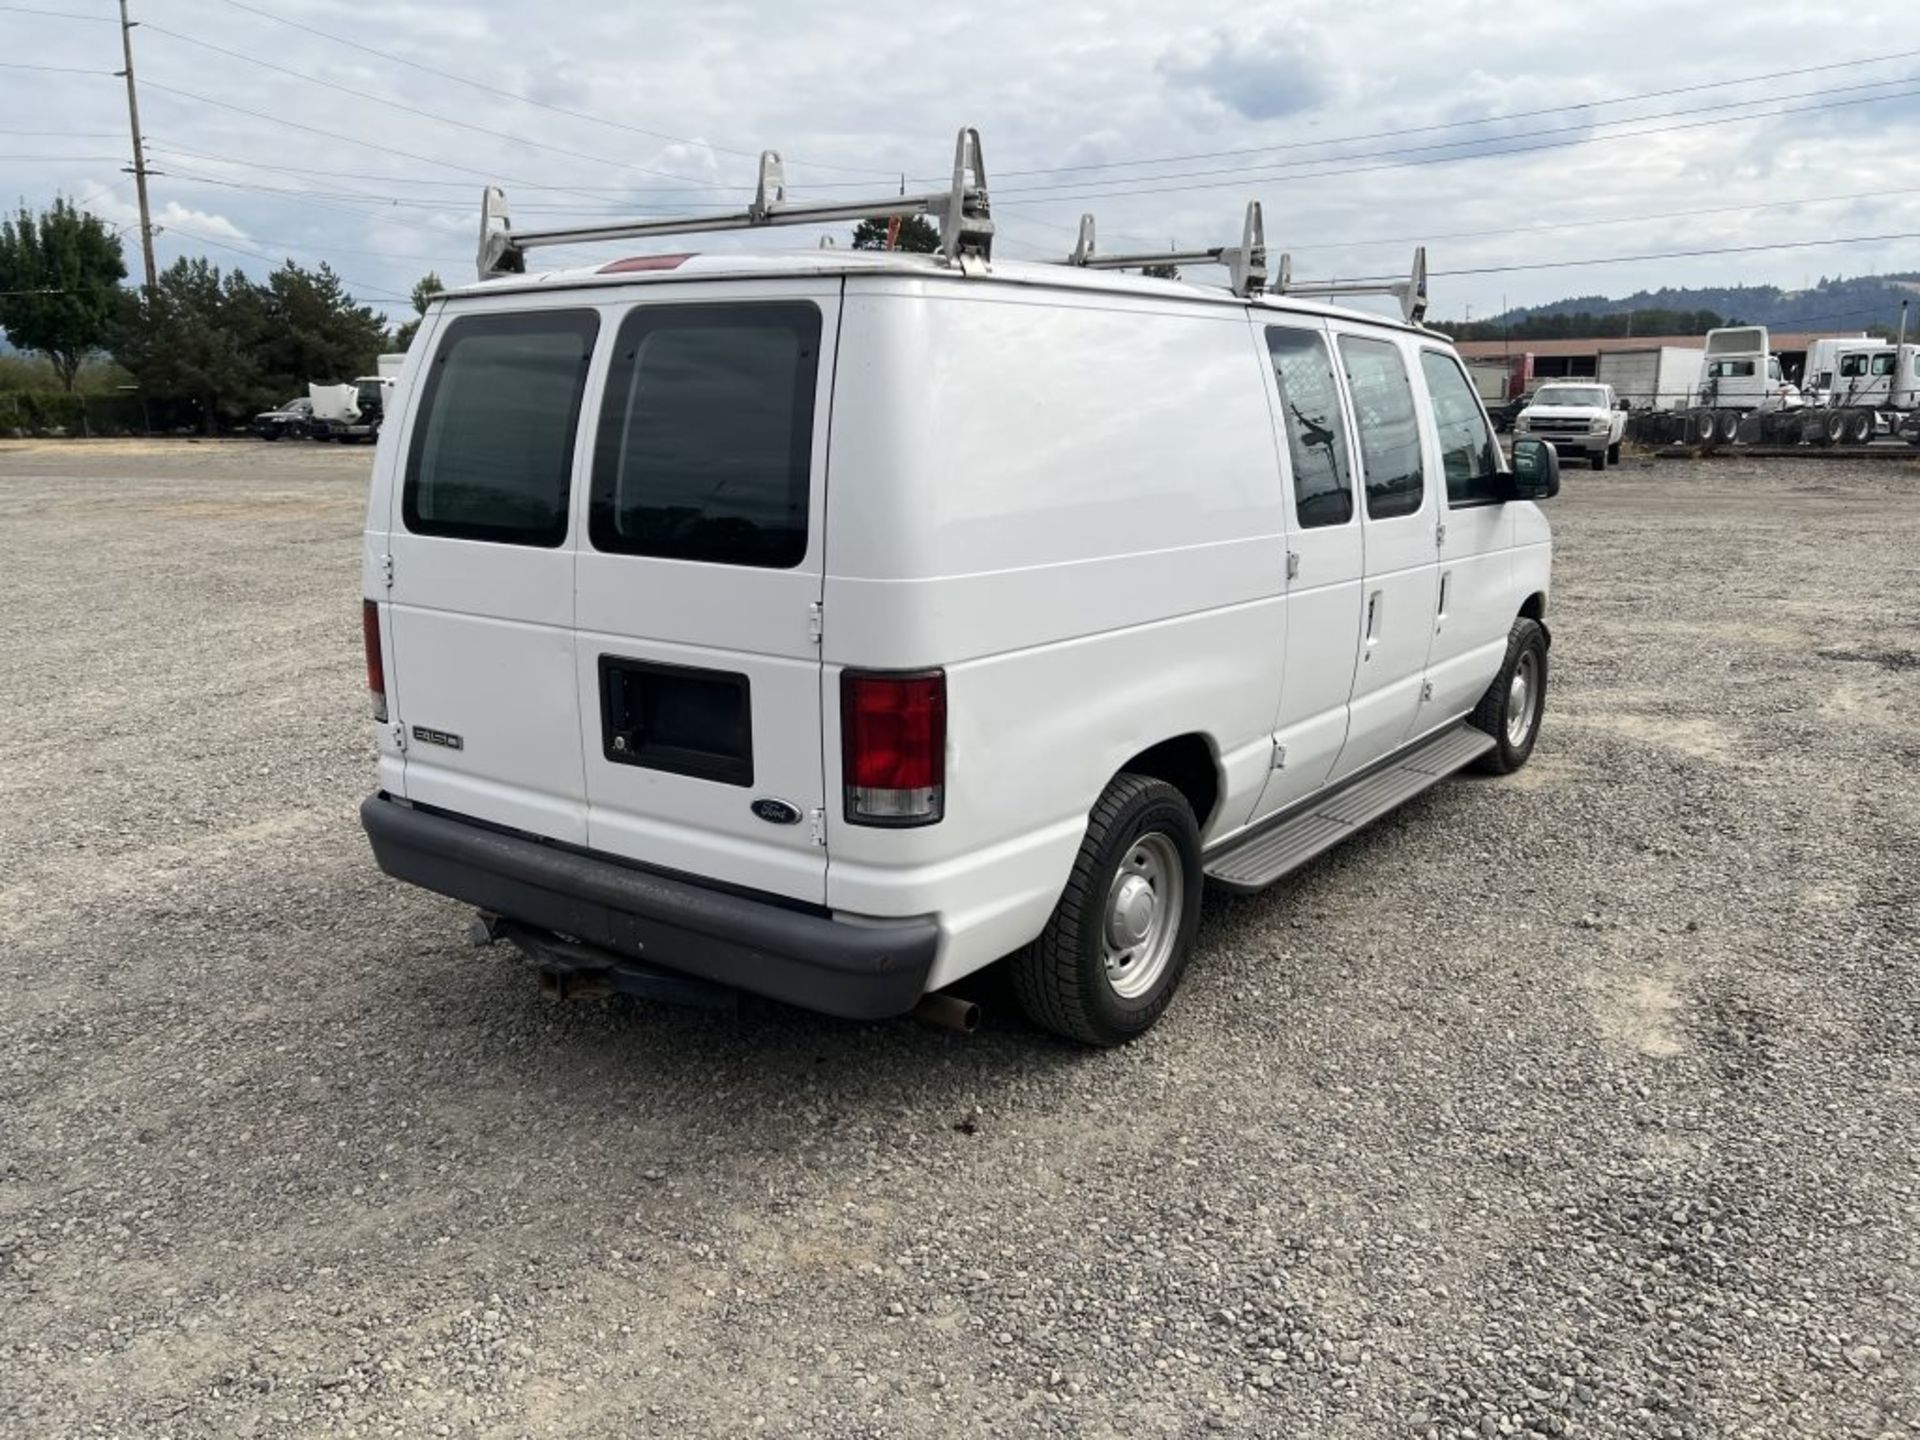 2006 Ford E150 Cargo Van - Image 4 of 21